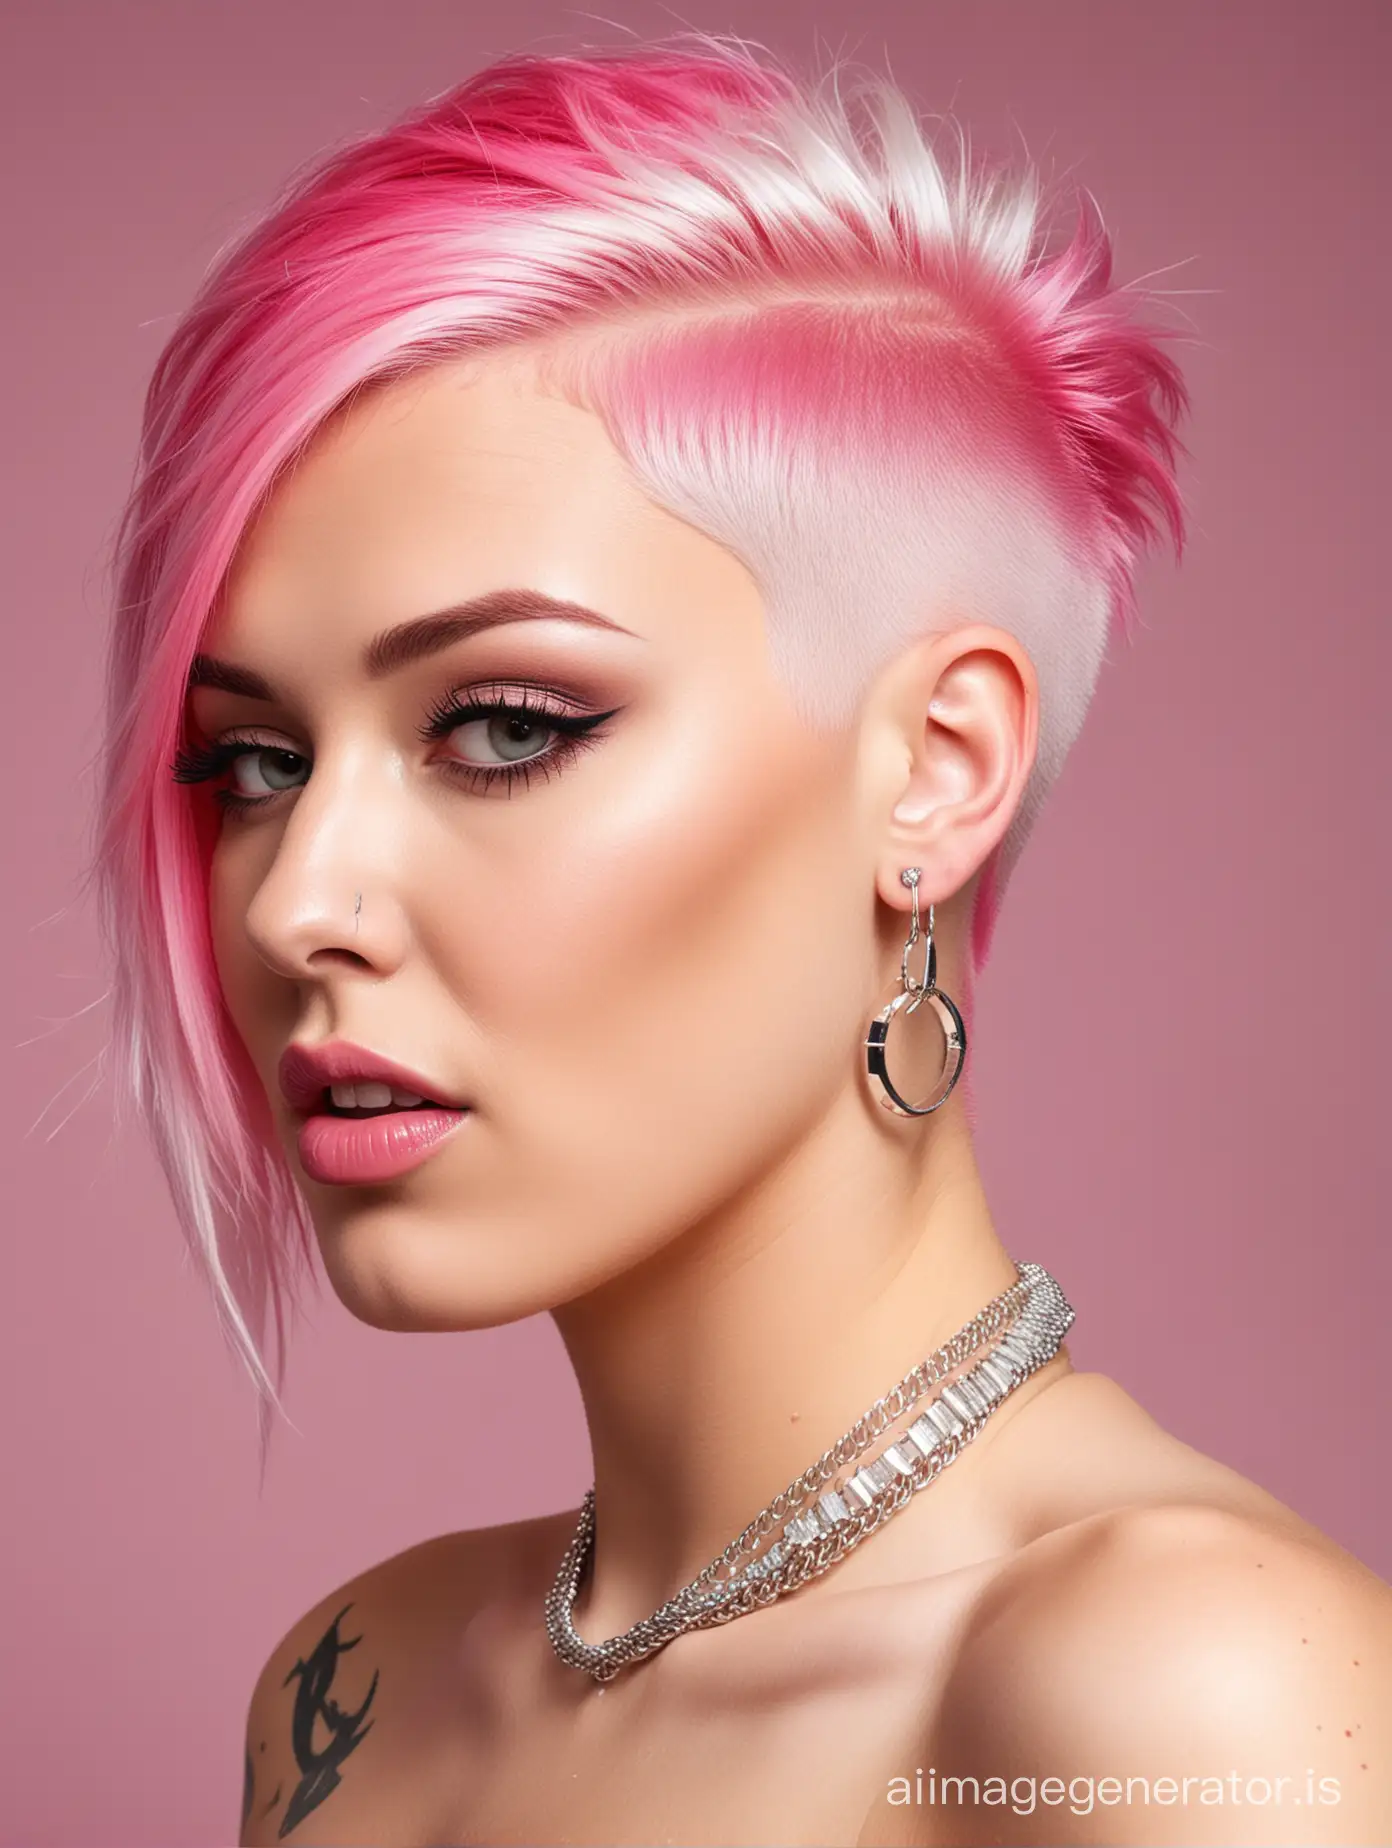 Boldly-Styled-Porn-Star-with-Pink-and-White-Asymmetric-Hair-and-Piercings